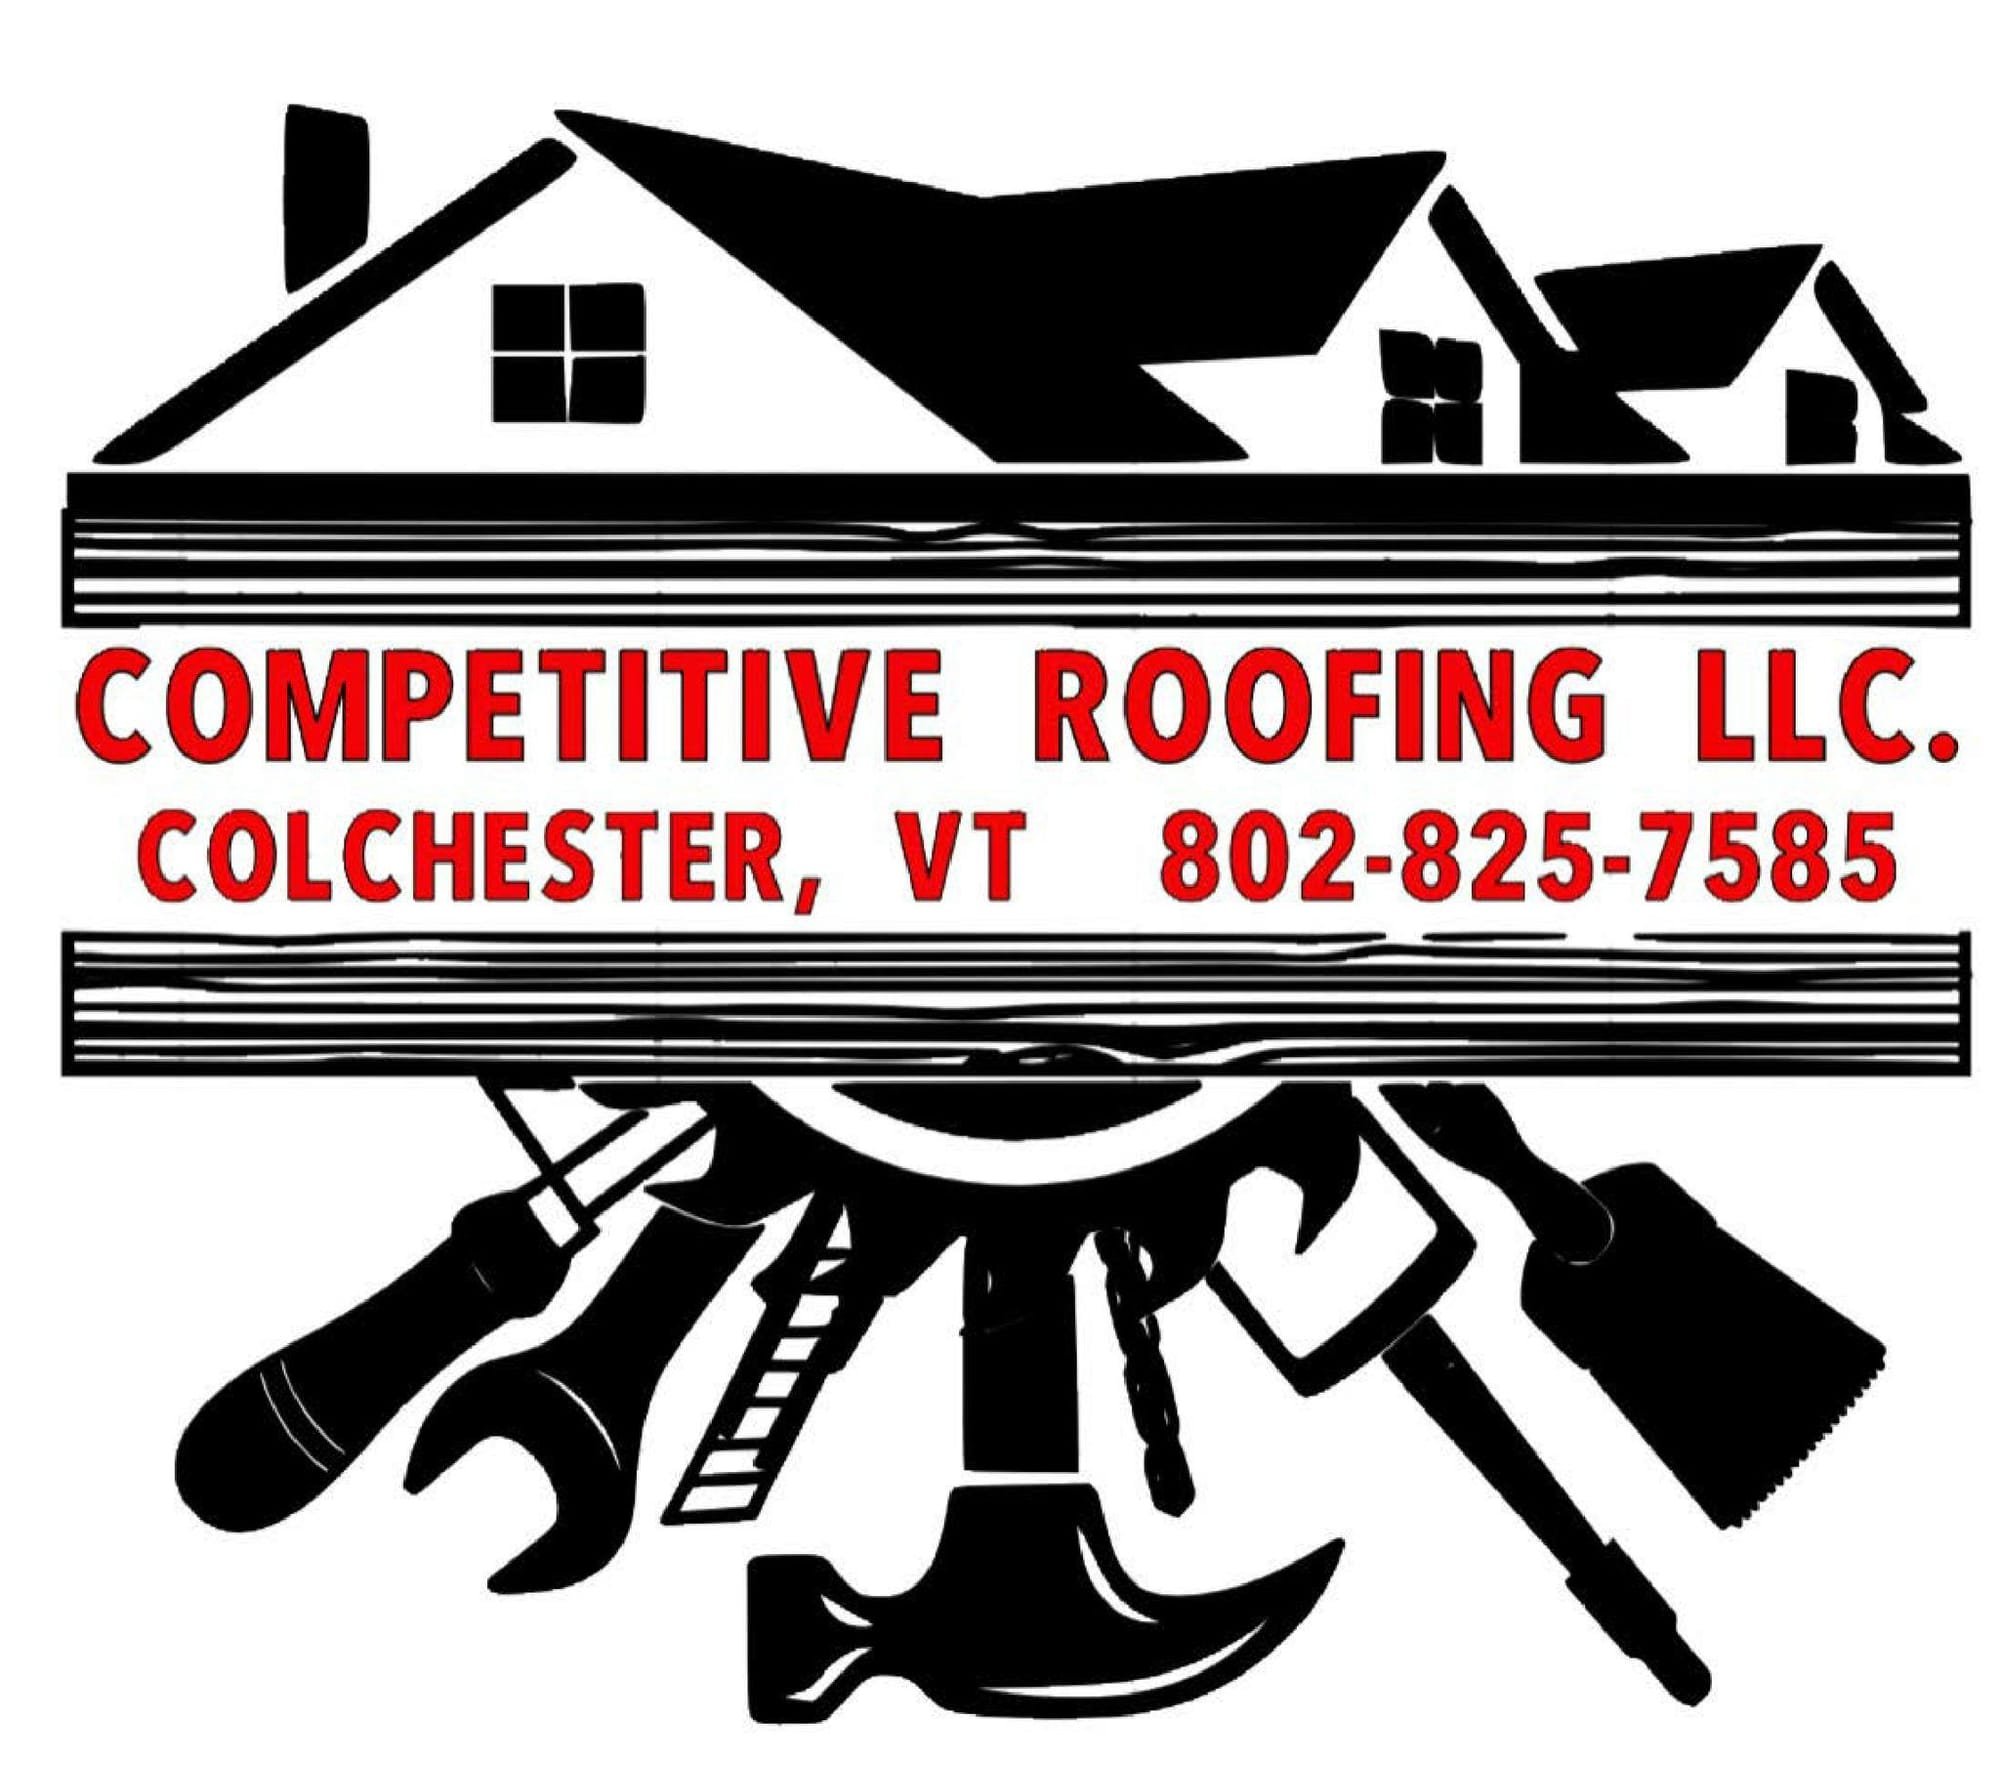 Competitive Roofing Inc.